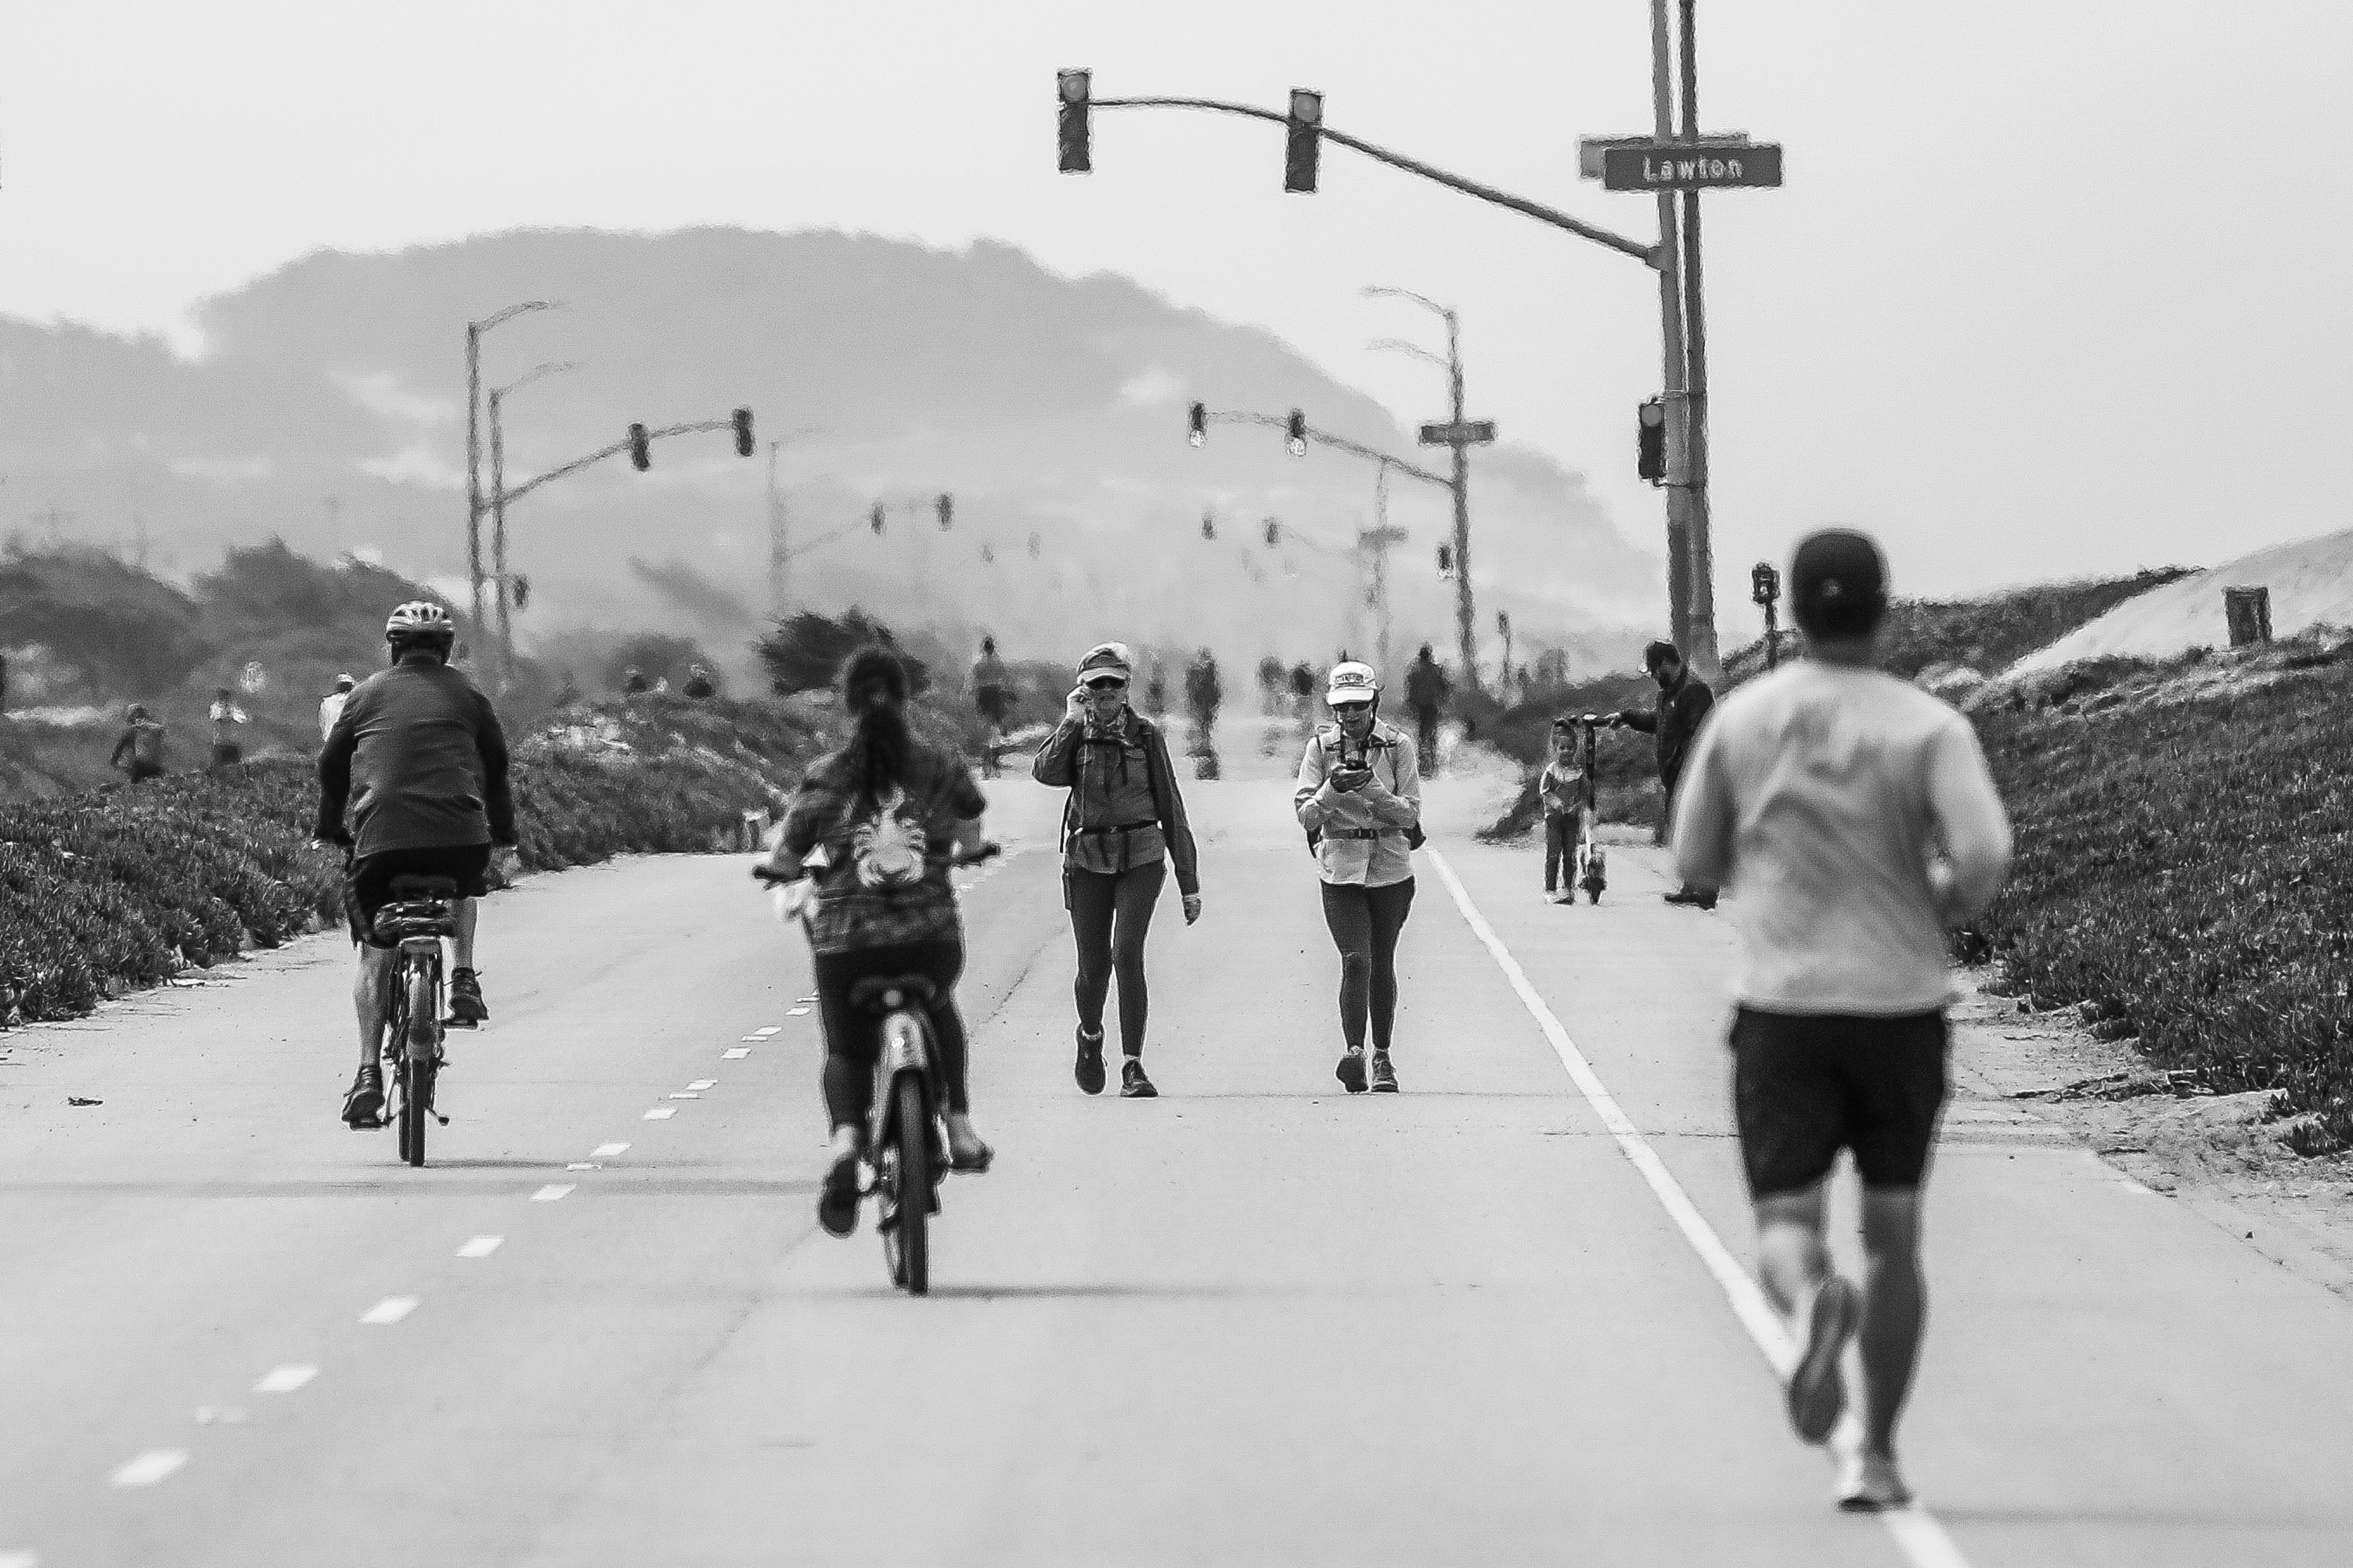 The image shows a grayscale scene of a shared road with cyclists and pedestrians, some jogging or walking dogs. Traffic lights and distant hills are visible ahead.